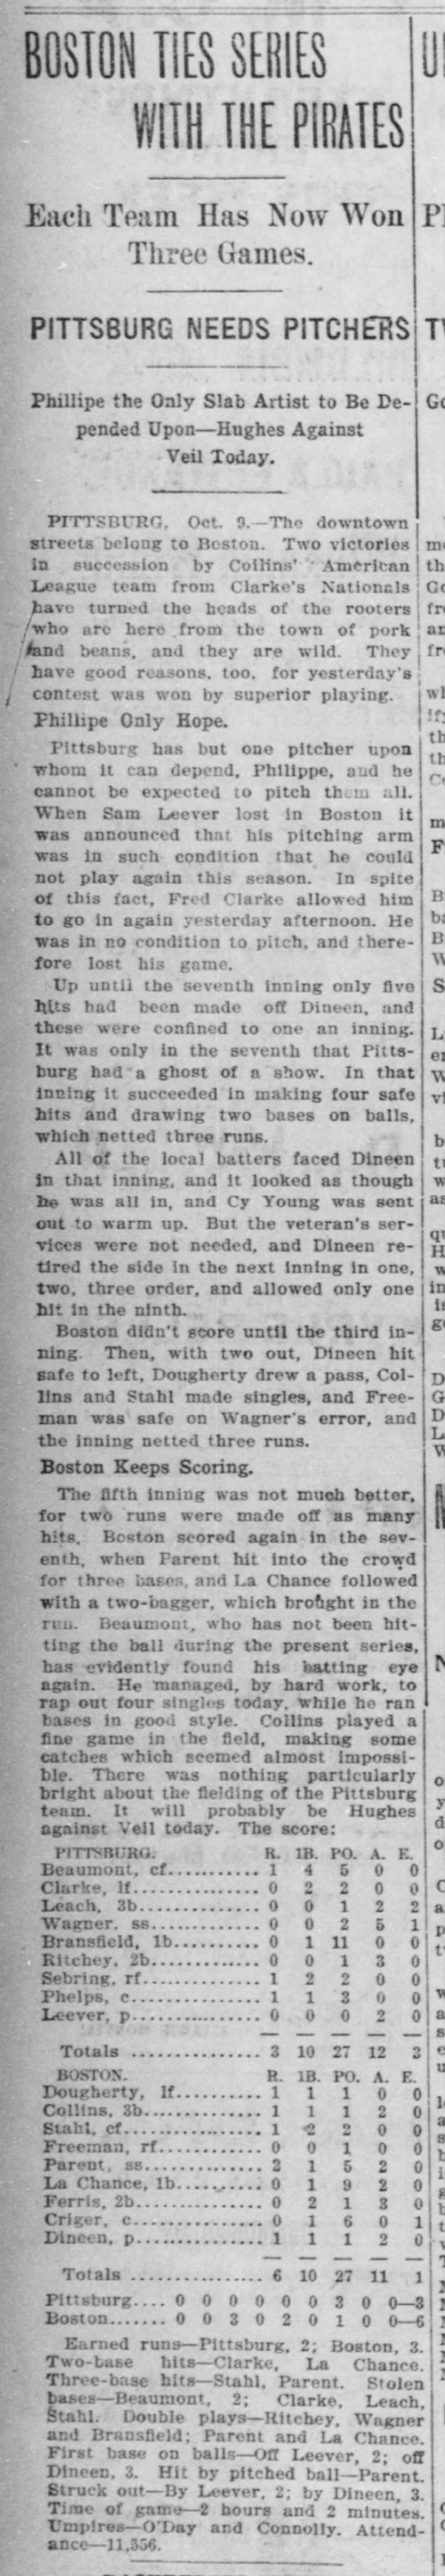 Game 6 of 1903 World Series ties Boston and Pittsburgh 3-3